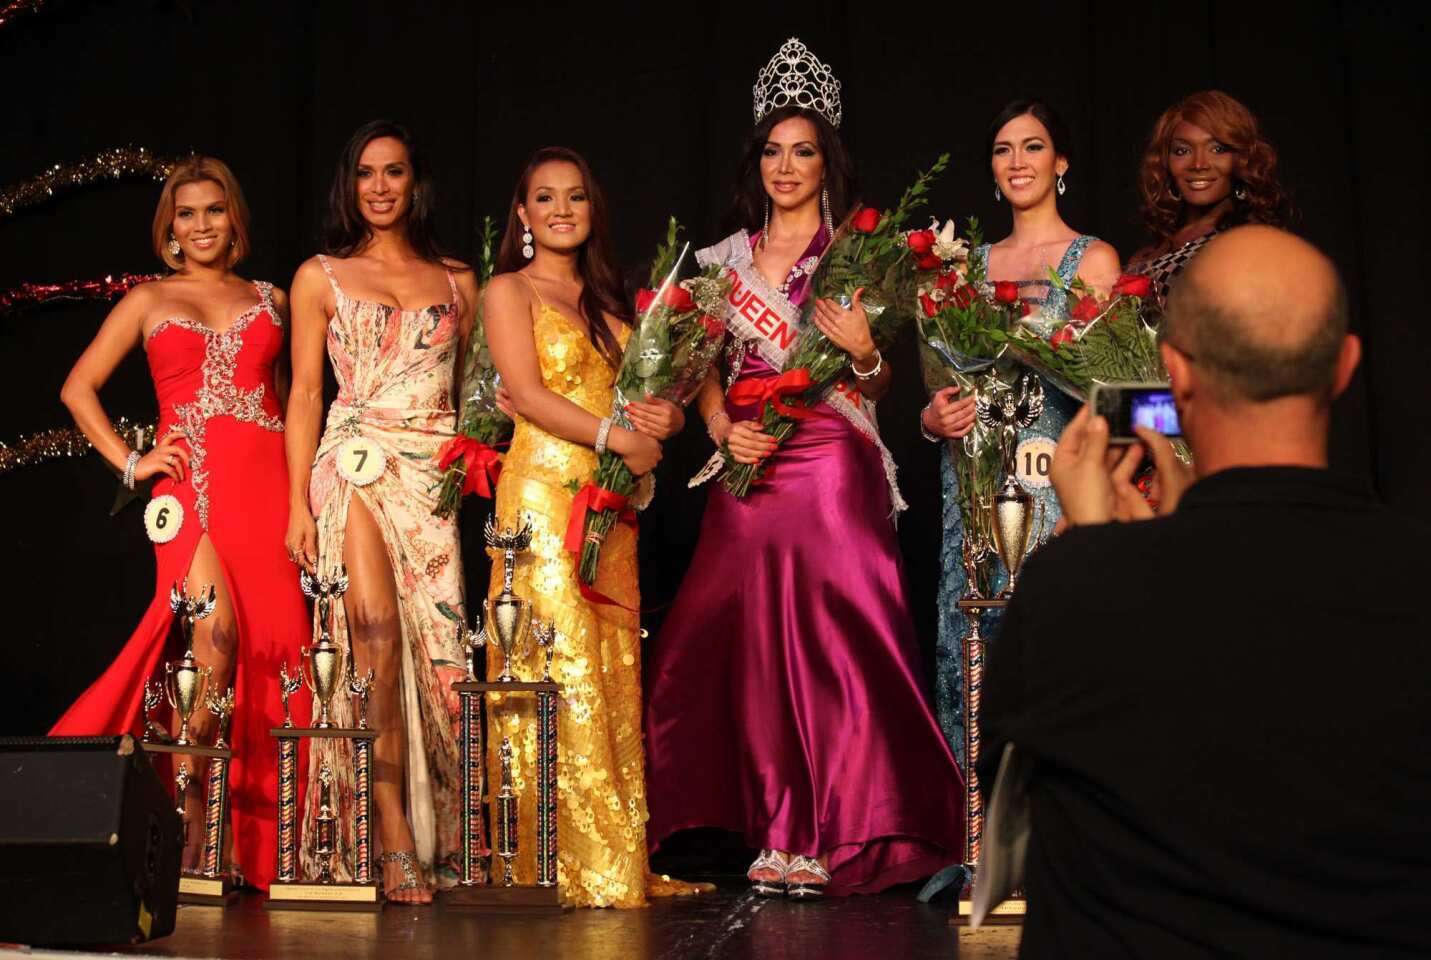 From left, Miss New York, Miss Oklahoma, Miss Wyoming, Miss West Virginia, Miss Tennessee and Miss California pose for the cameras after the Miss Queen USA pageant at the Circus Disco in Los Angeles on Sunday night. Queen USA calls itself "the premier transgender beauty pageant in the United States."